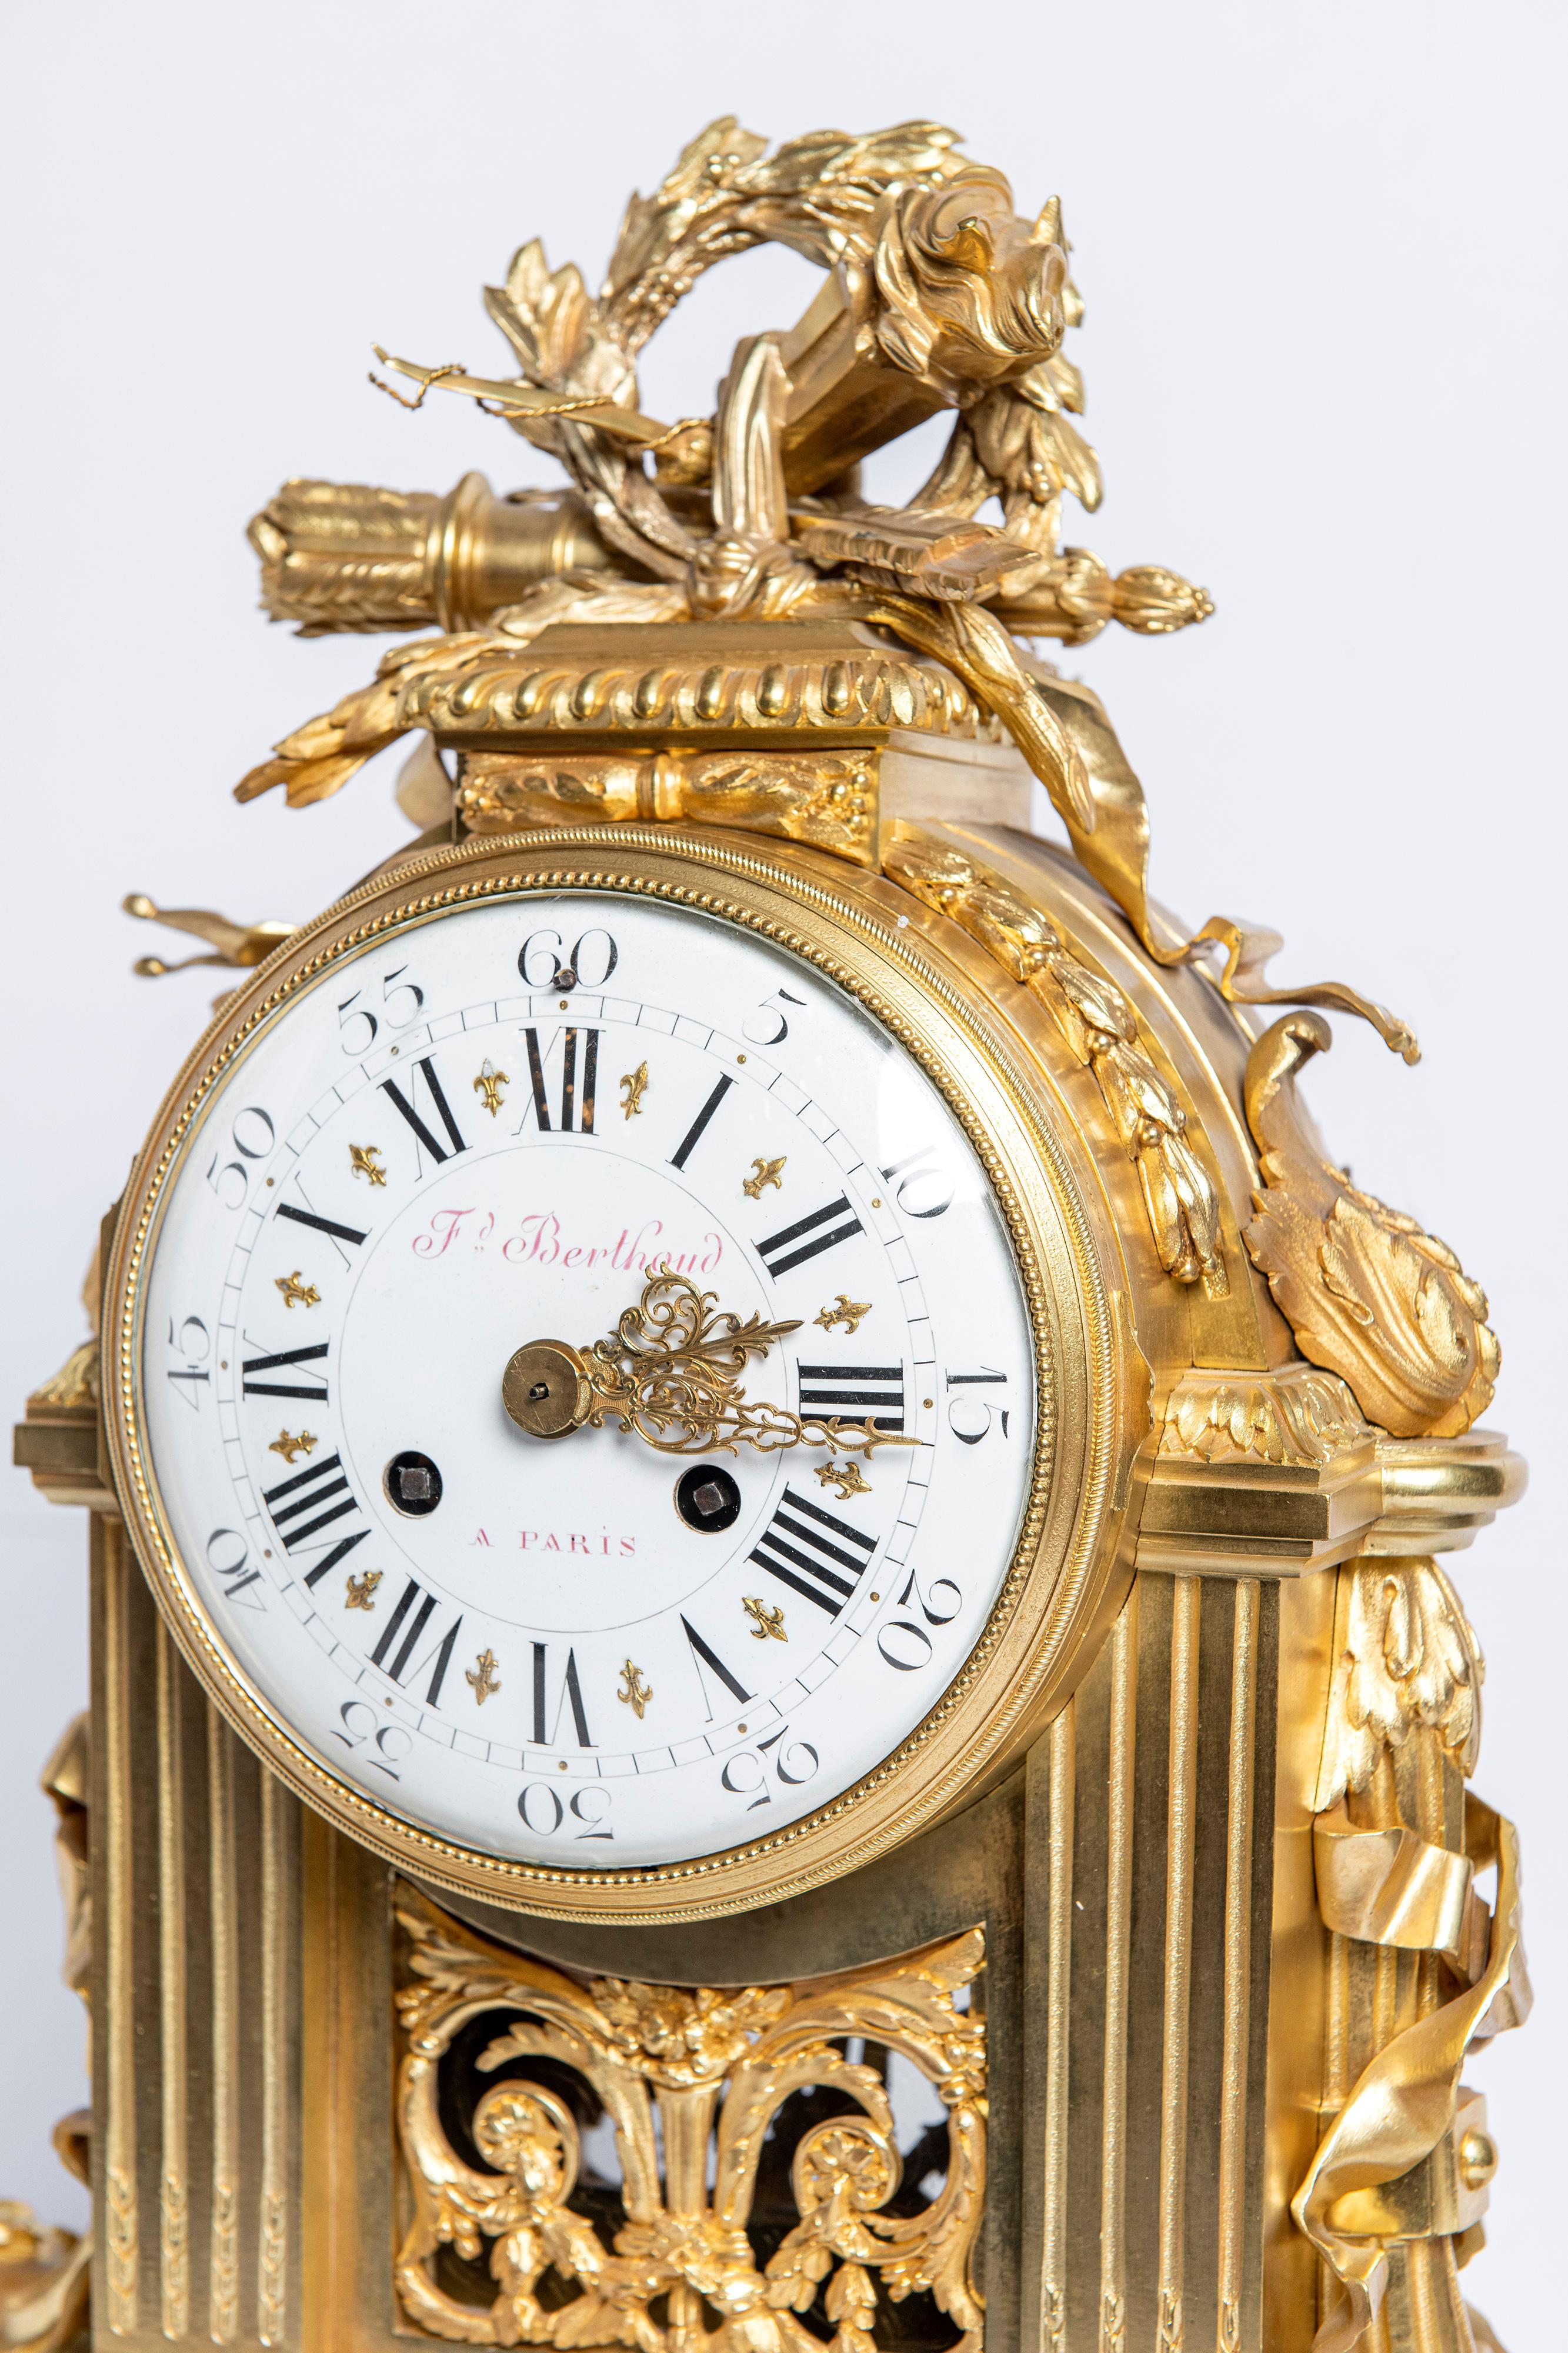 Gilt bronze and marble mantel clock, signed F. Berthoud, Paris, France, early 19th century.
Clock works.